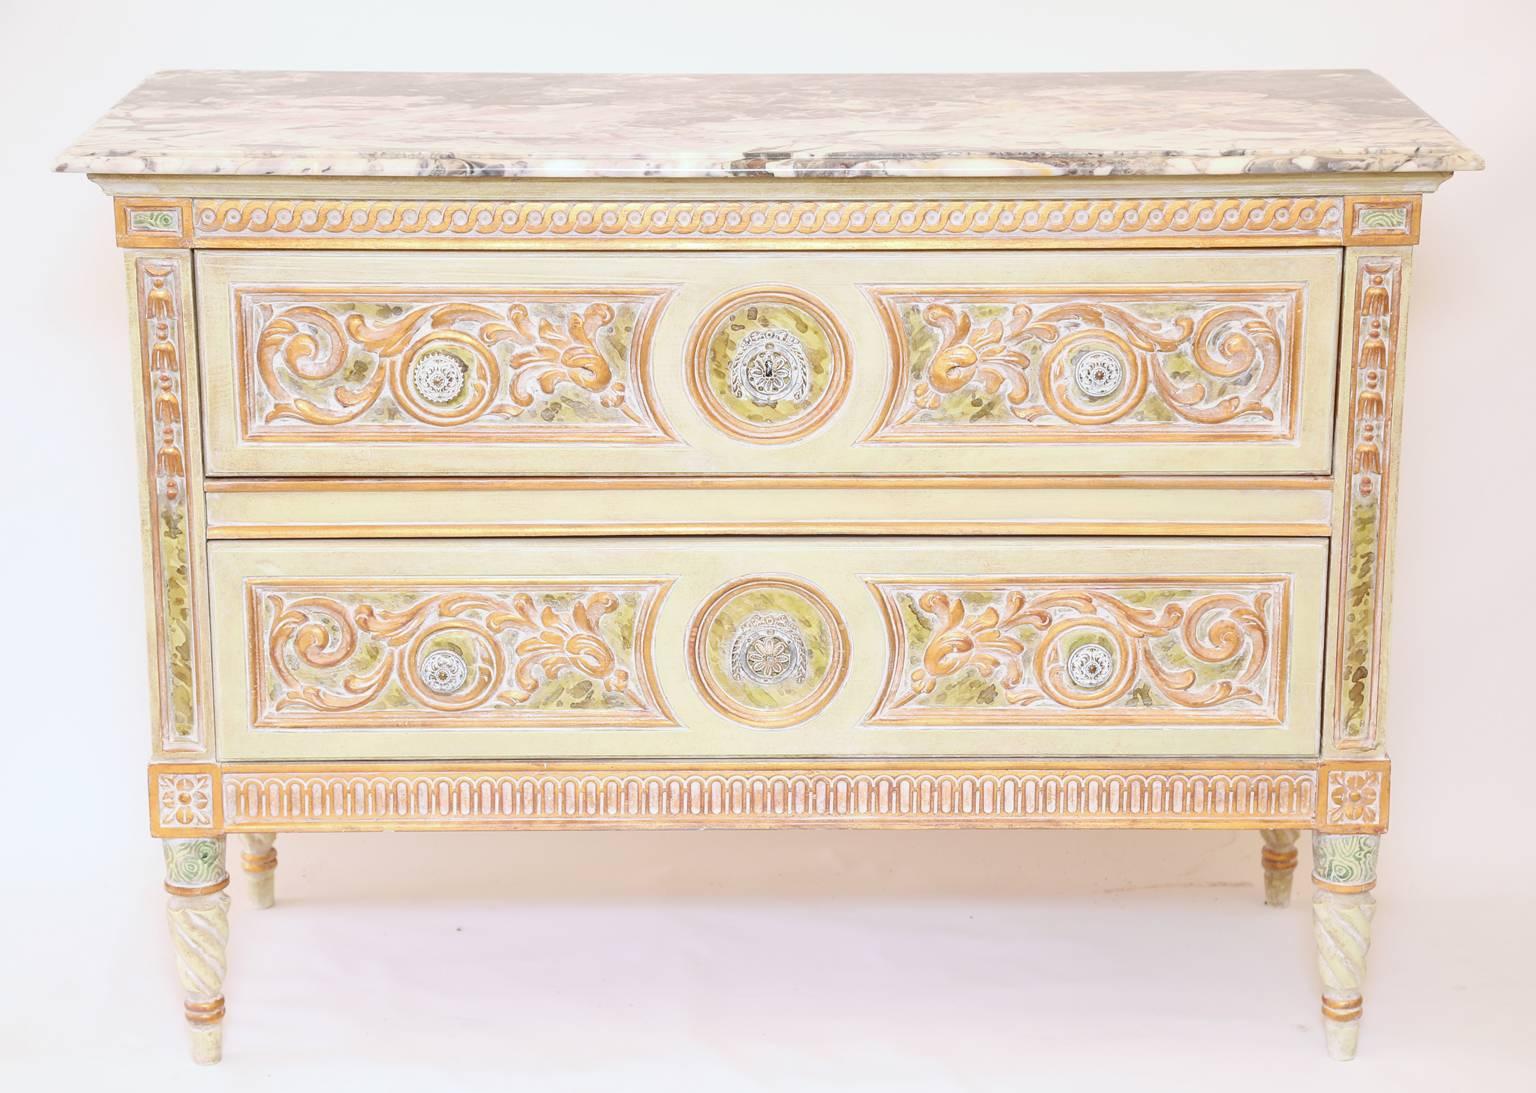 Commode, having a colorful painted finish, with a rectangular marble top, over elaborately carved case, double stack drawers decorated with scrollwork, flanked by foliate stiles, guilloche-carved apron, raised on spiral-turned, tapering legs ending